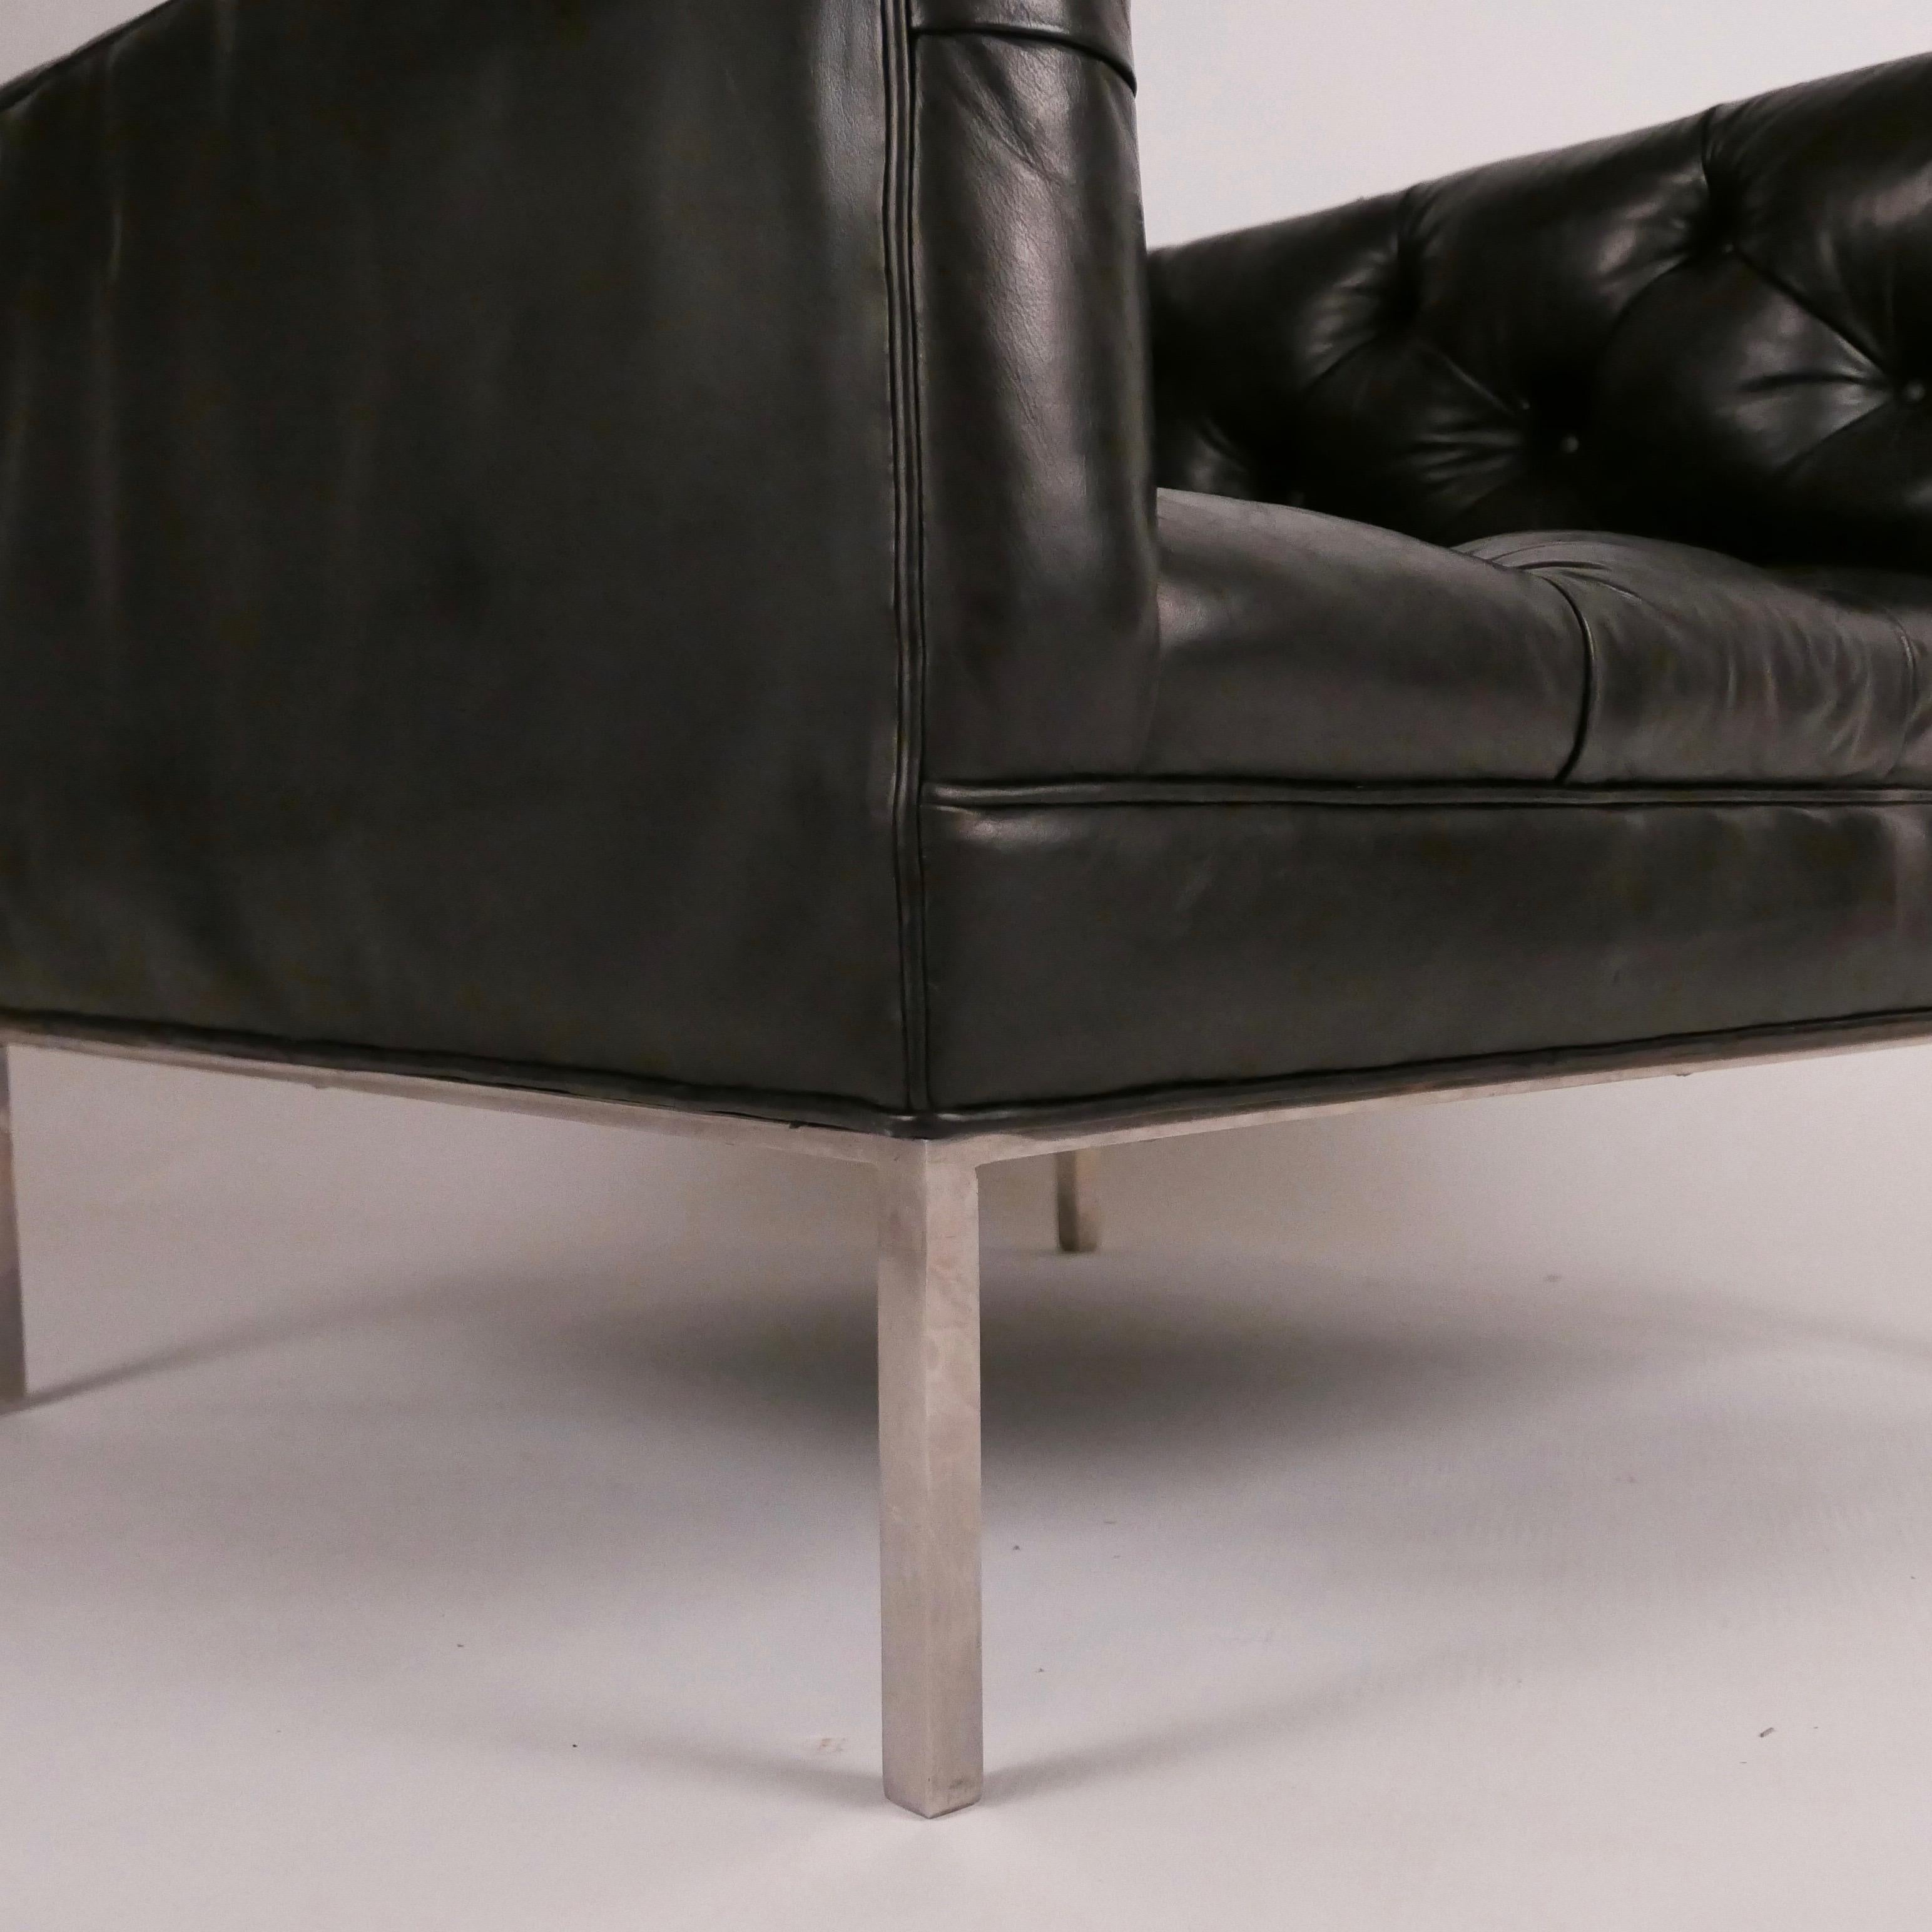 Mid-Century Modern Architect Pair of Tufted Leather and Solid Stainless Steel Tuxedo Club Chairs